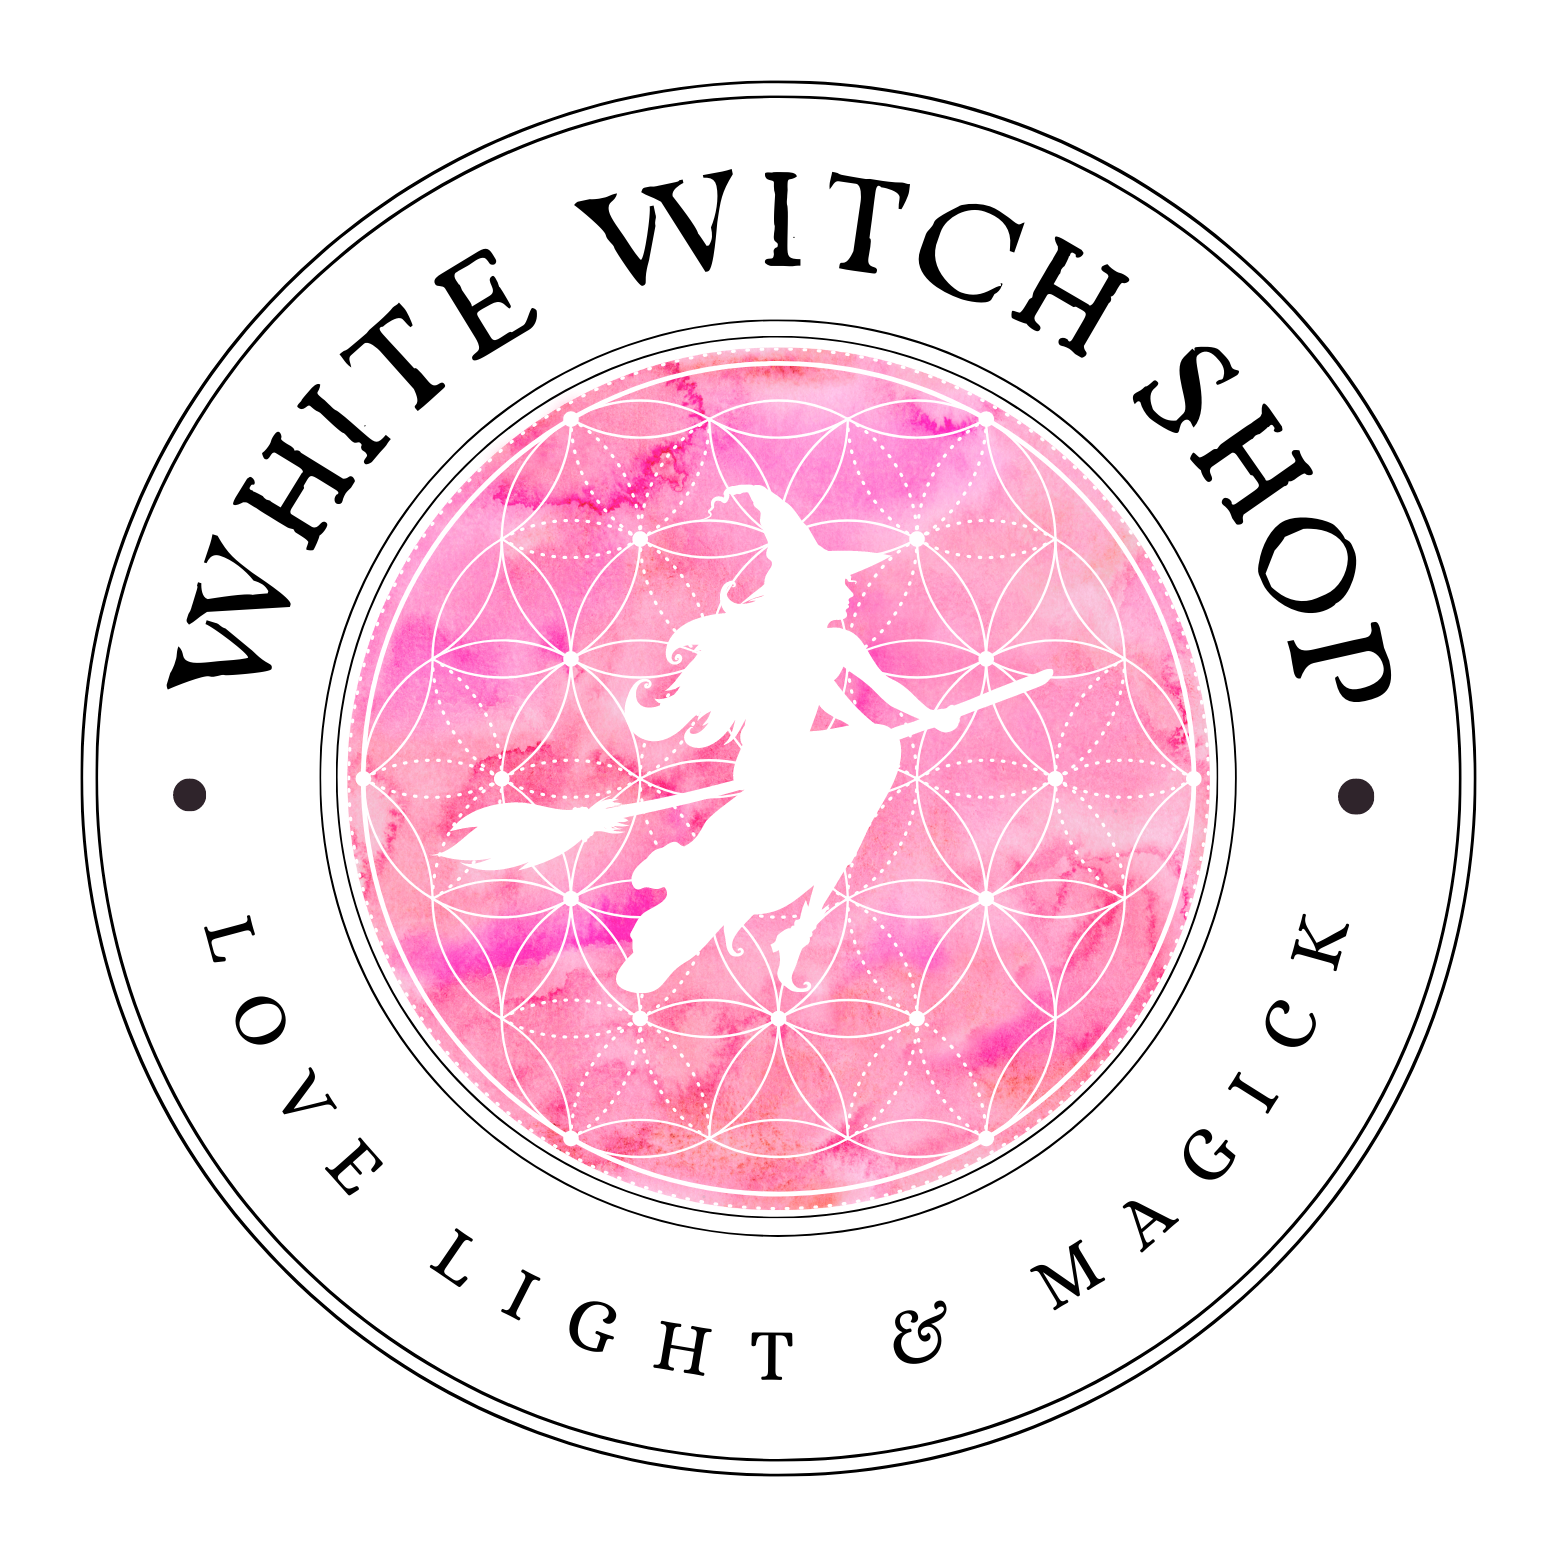 White Witch Shop